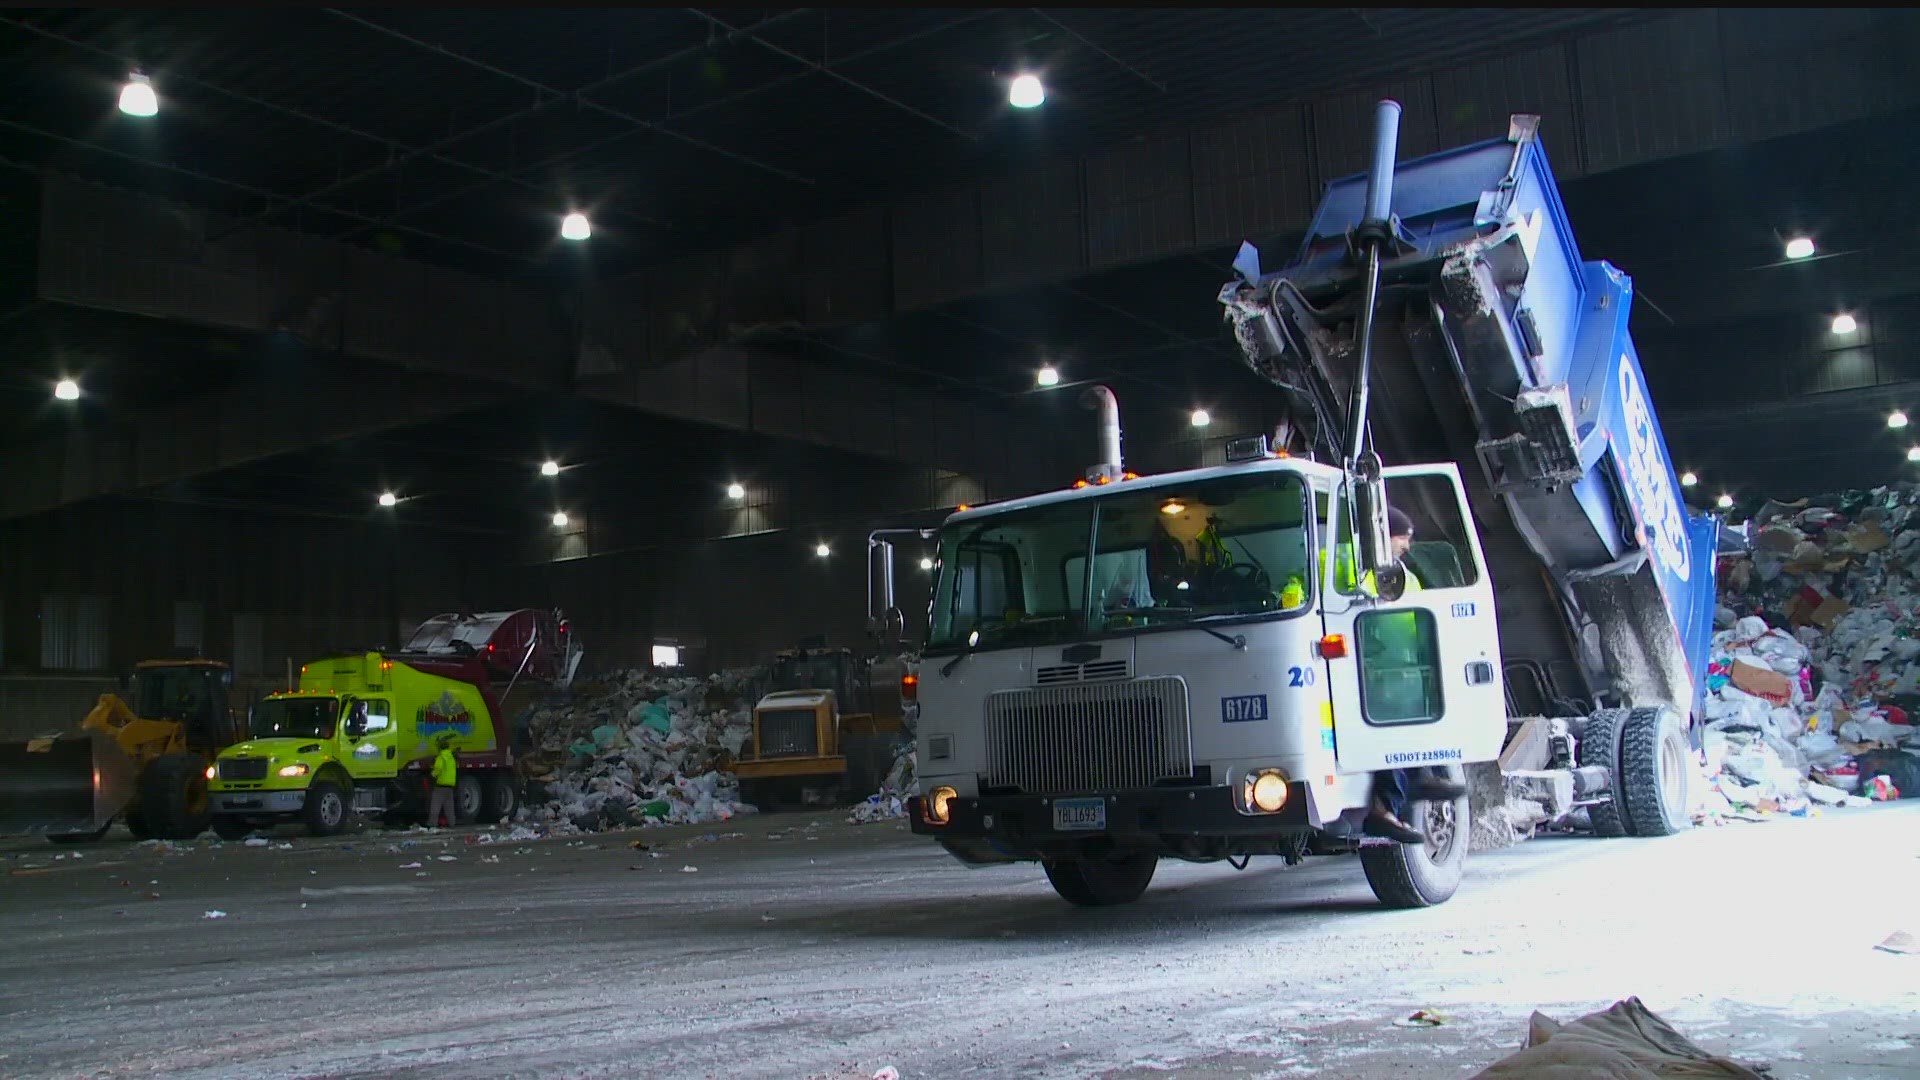 State agencies have 70 different ideas together in a draft plan to address the growing concern around Twin Cities waste.